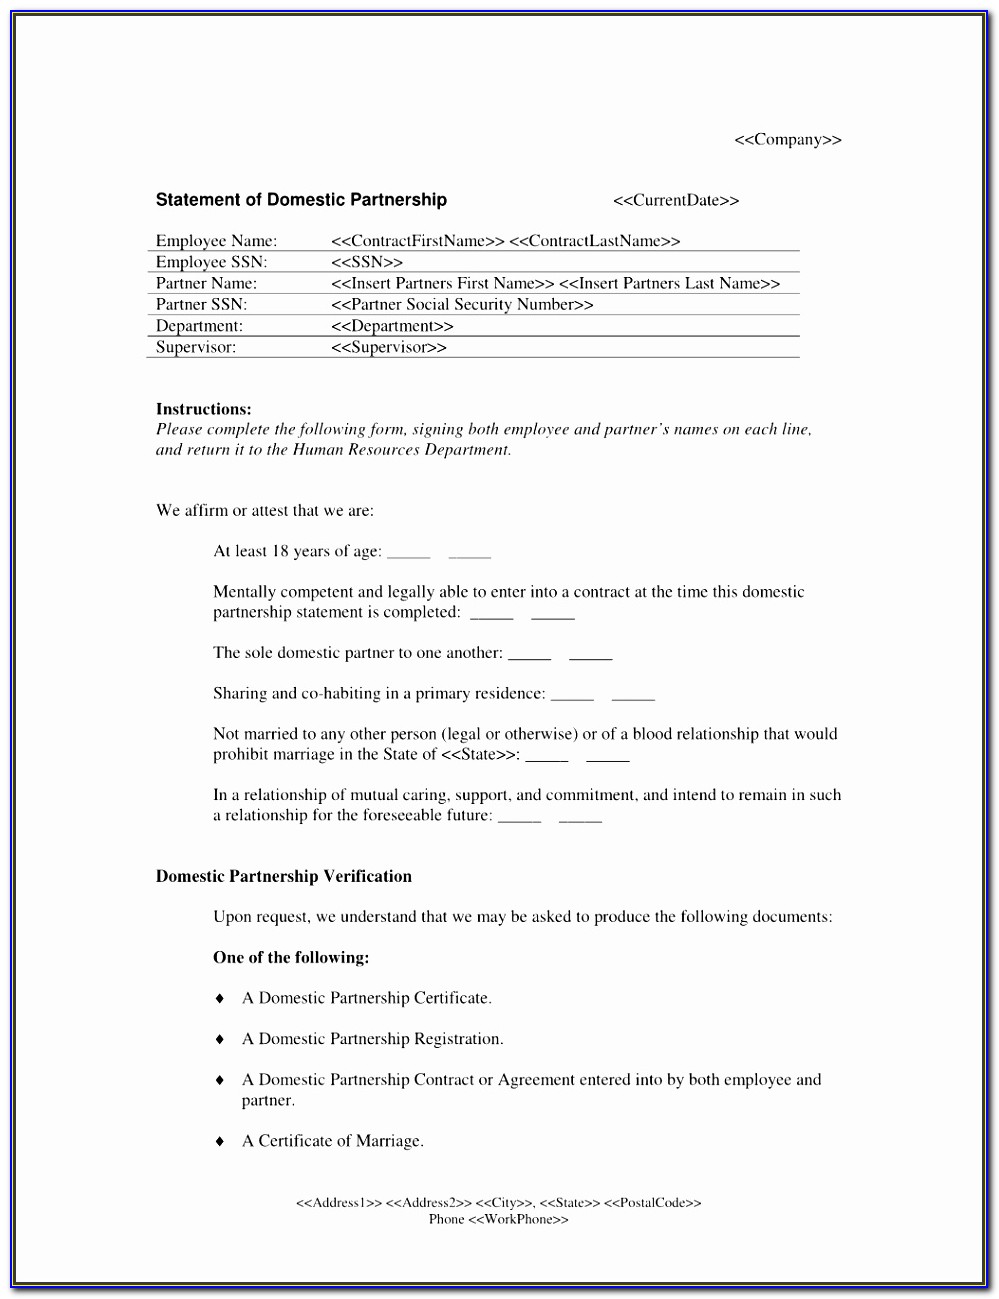 Demolition Contract Template